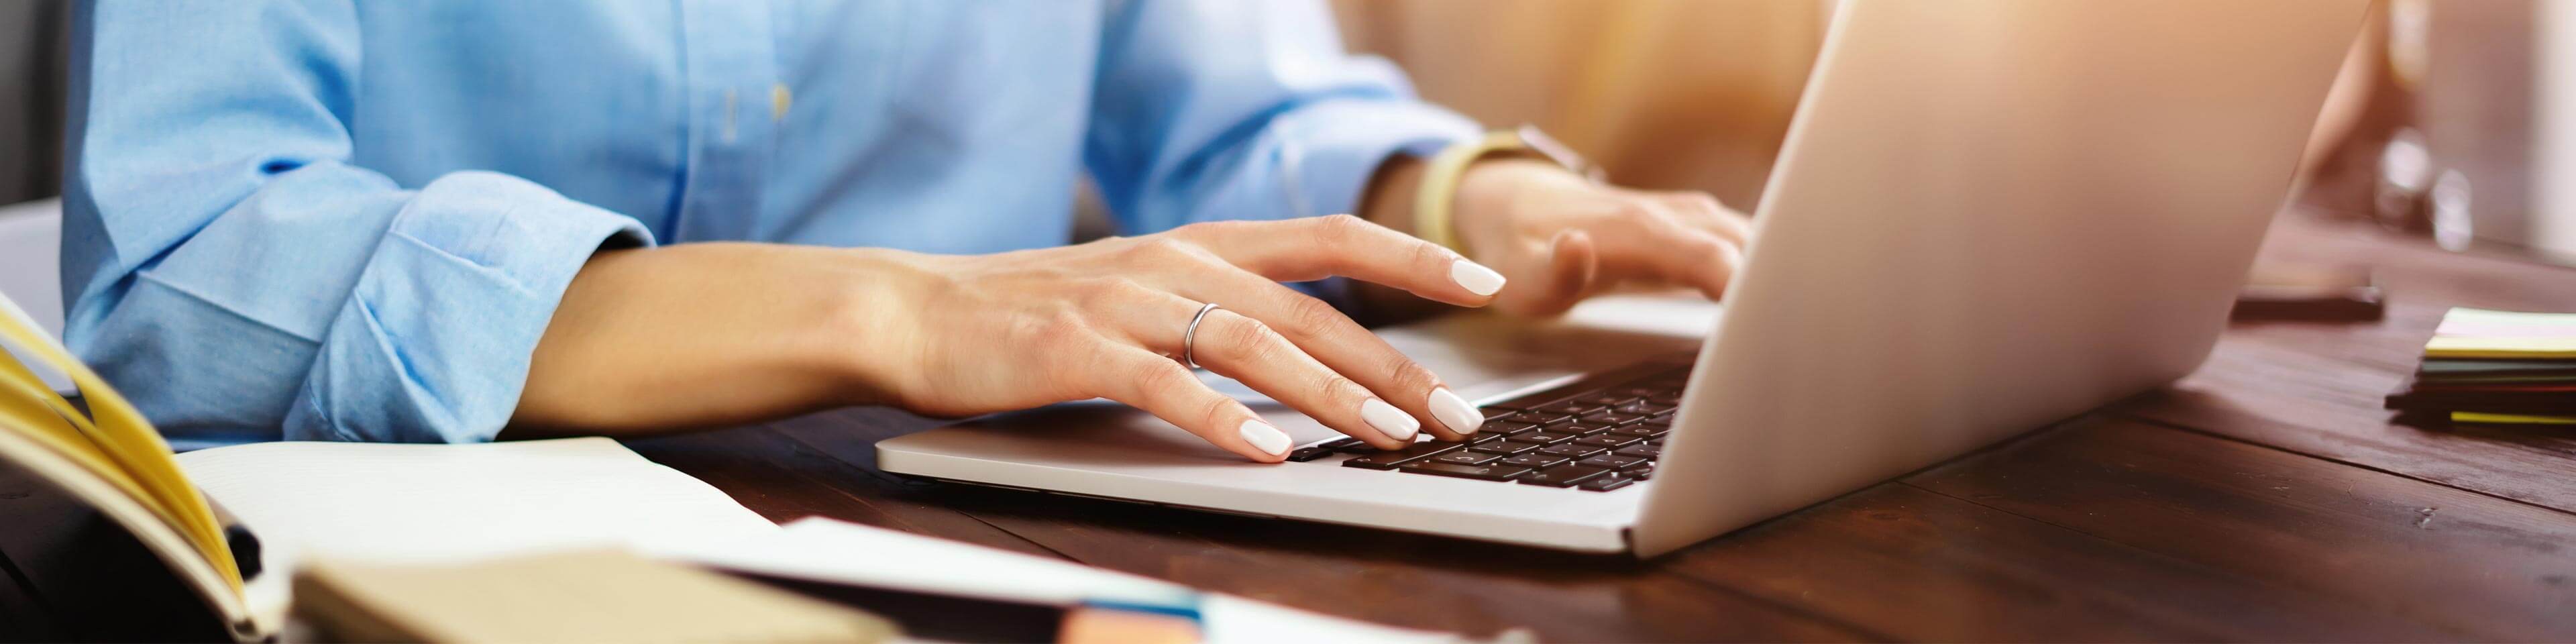 Woman in a blue button-up shirt typing on a laptop with paperwork next to her